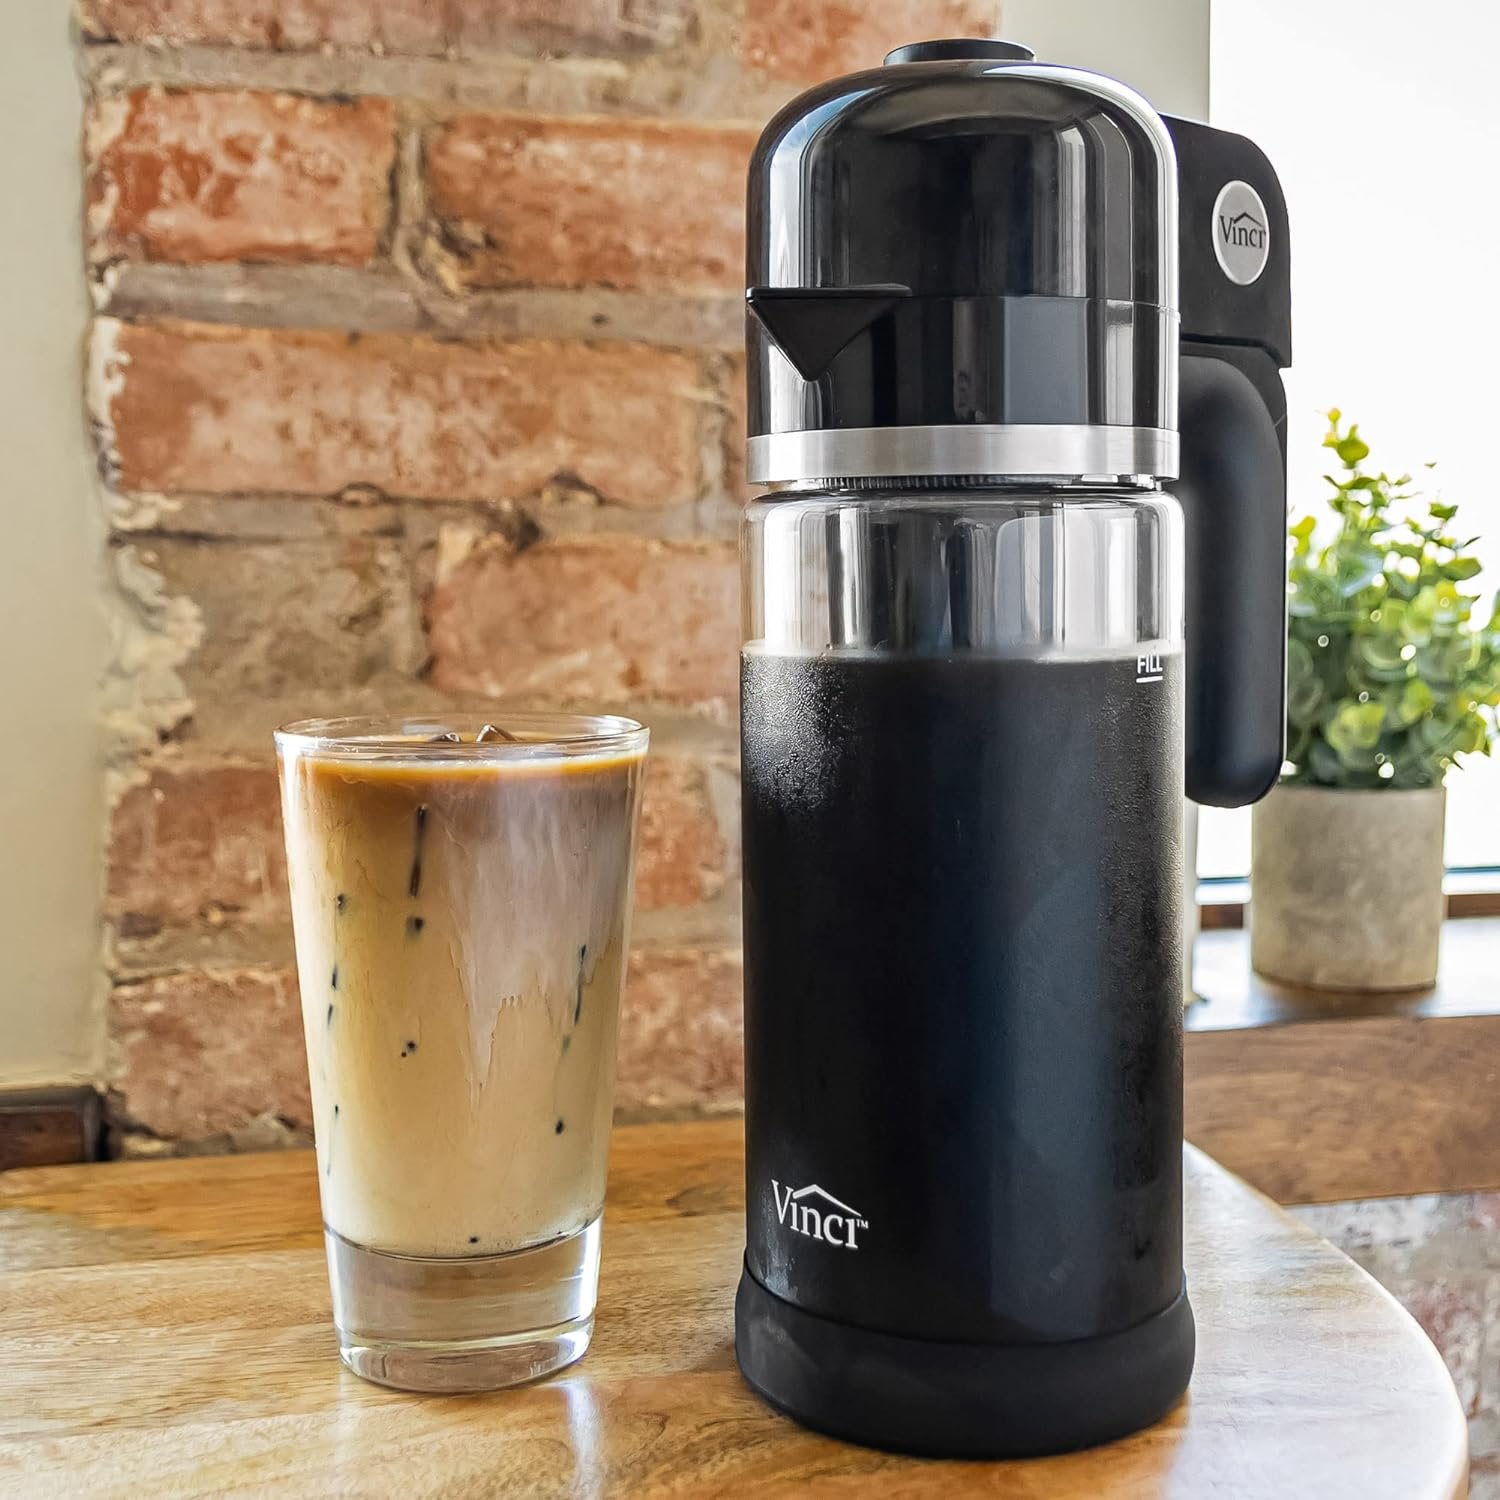 vinci express cold brew coffee maker review